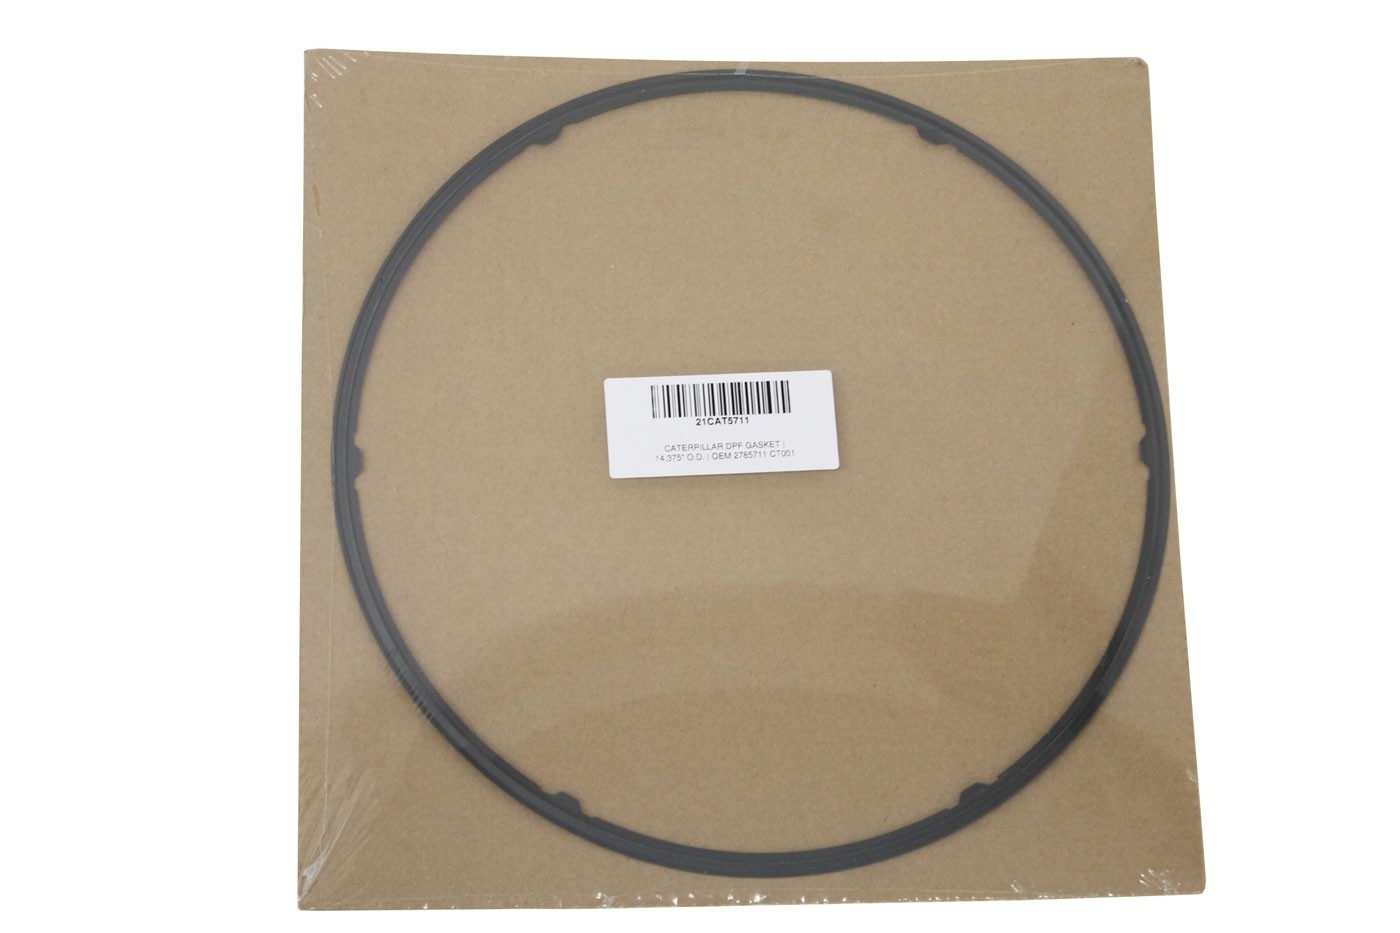 CATERPILLAR DPF GASKET | 14-3/8" O.D. | OEM 2785711 | INDIVIDUALLY PACKAGED